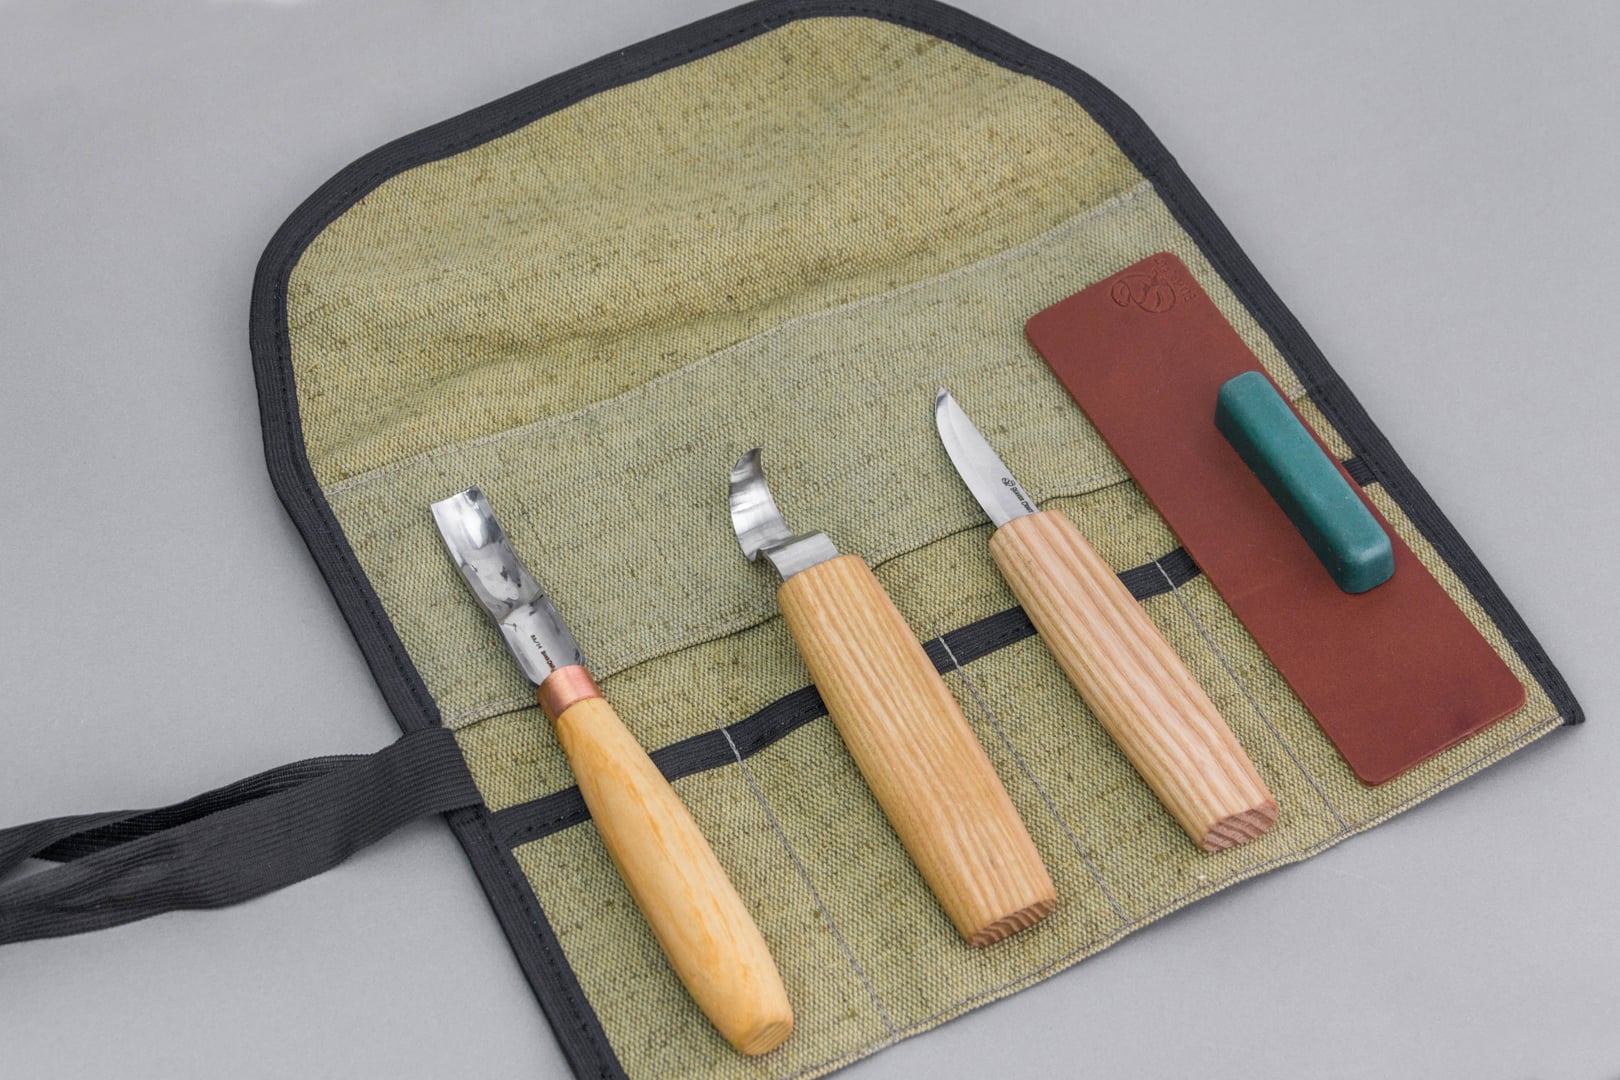 Stryi 5 Piece Spoon Carving Set Review